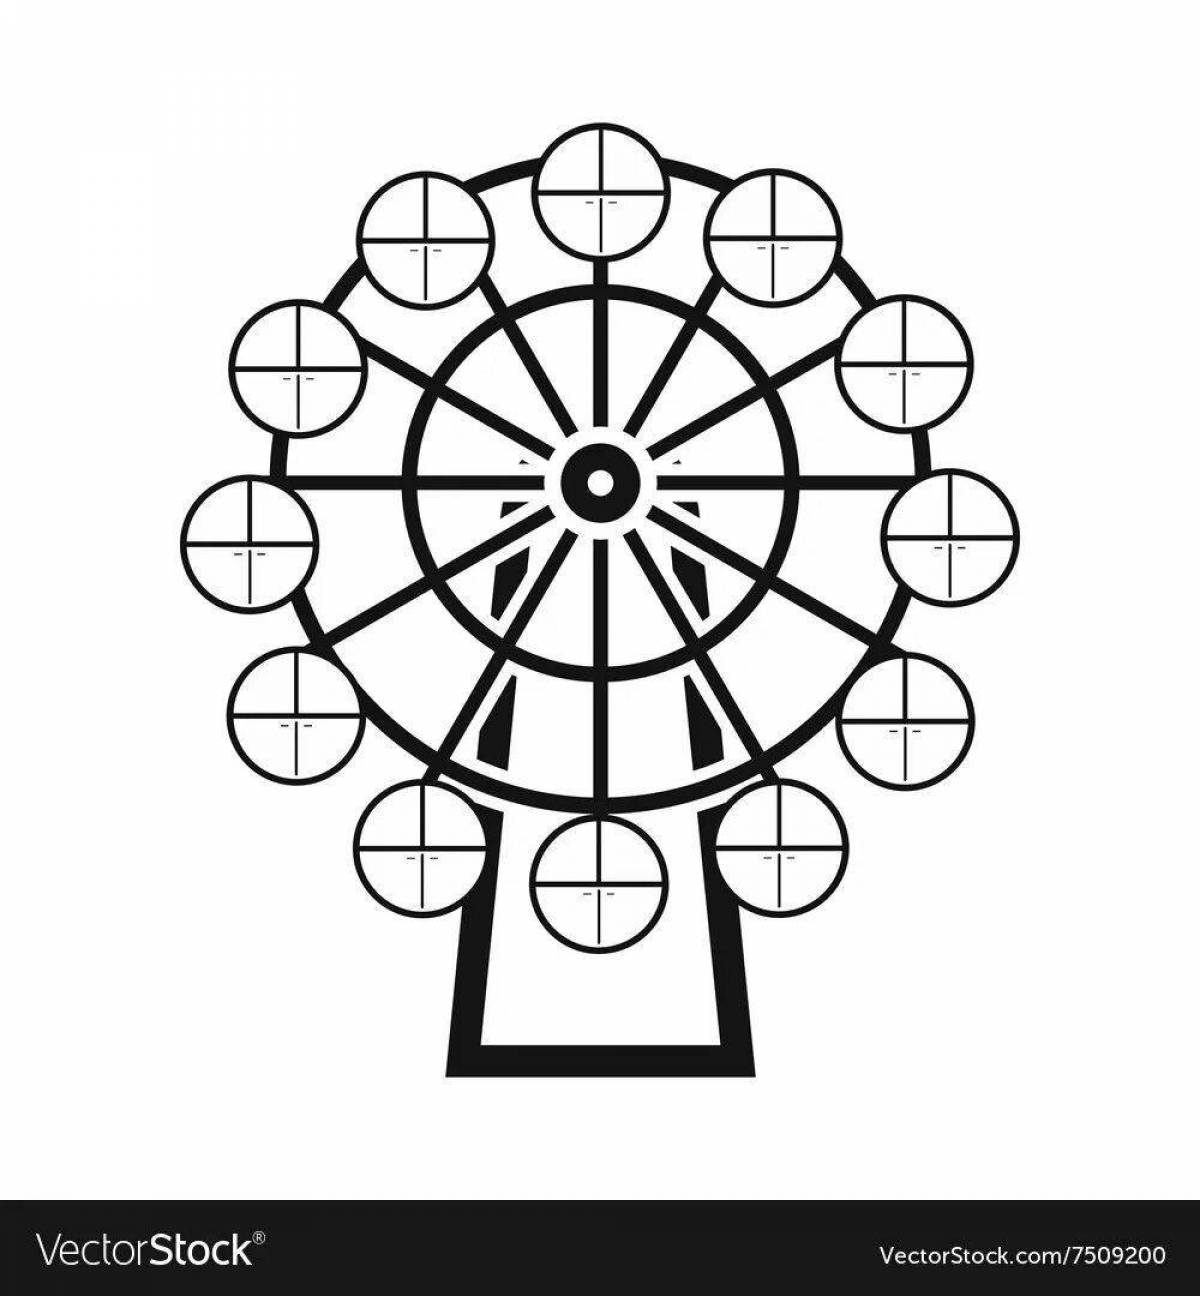 Cute ferris wheel coloring page for kids